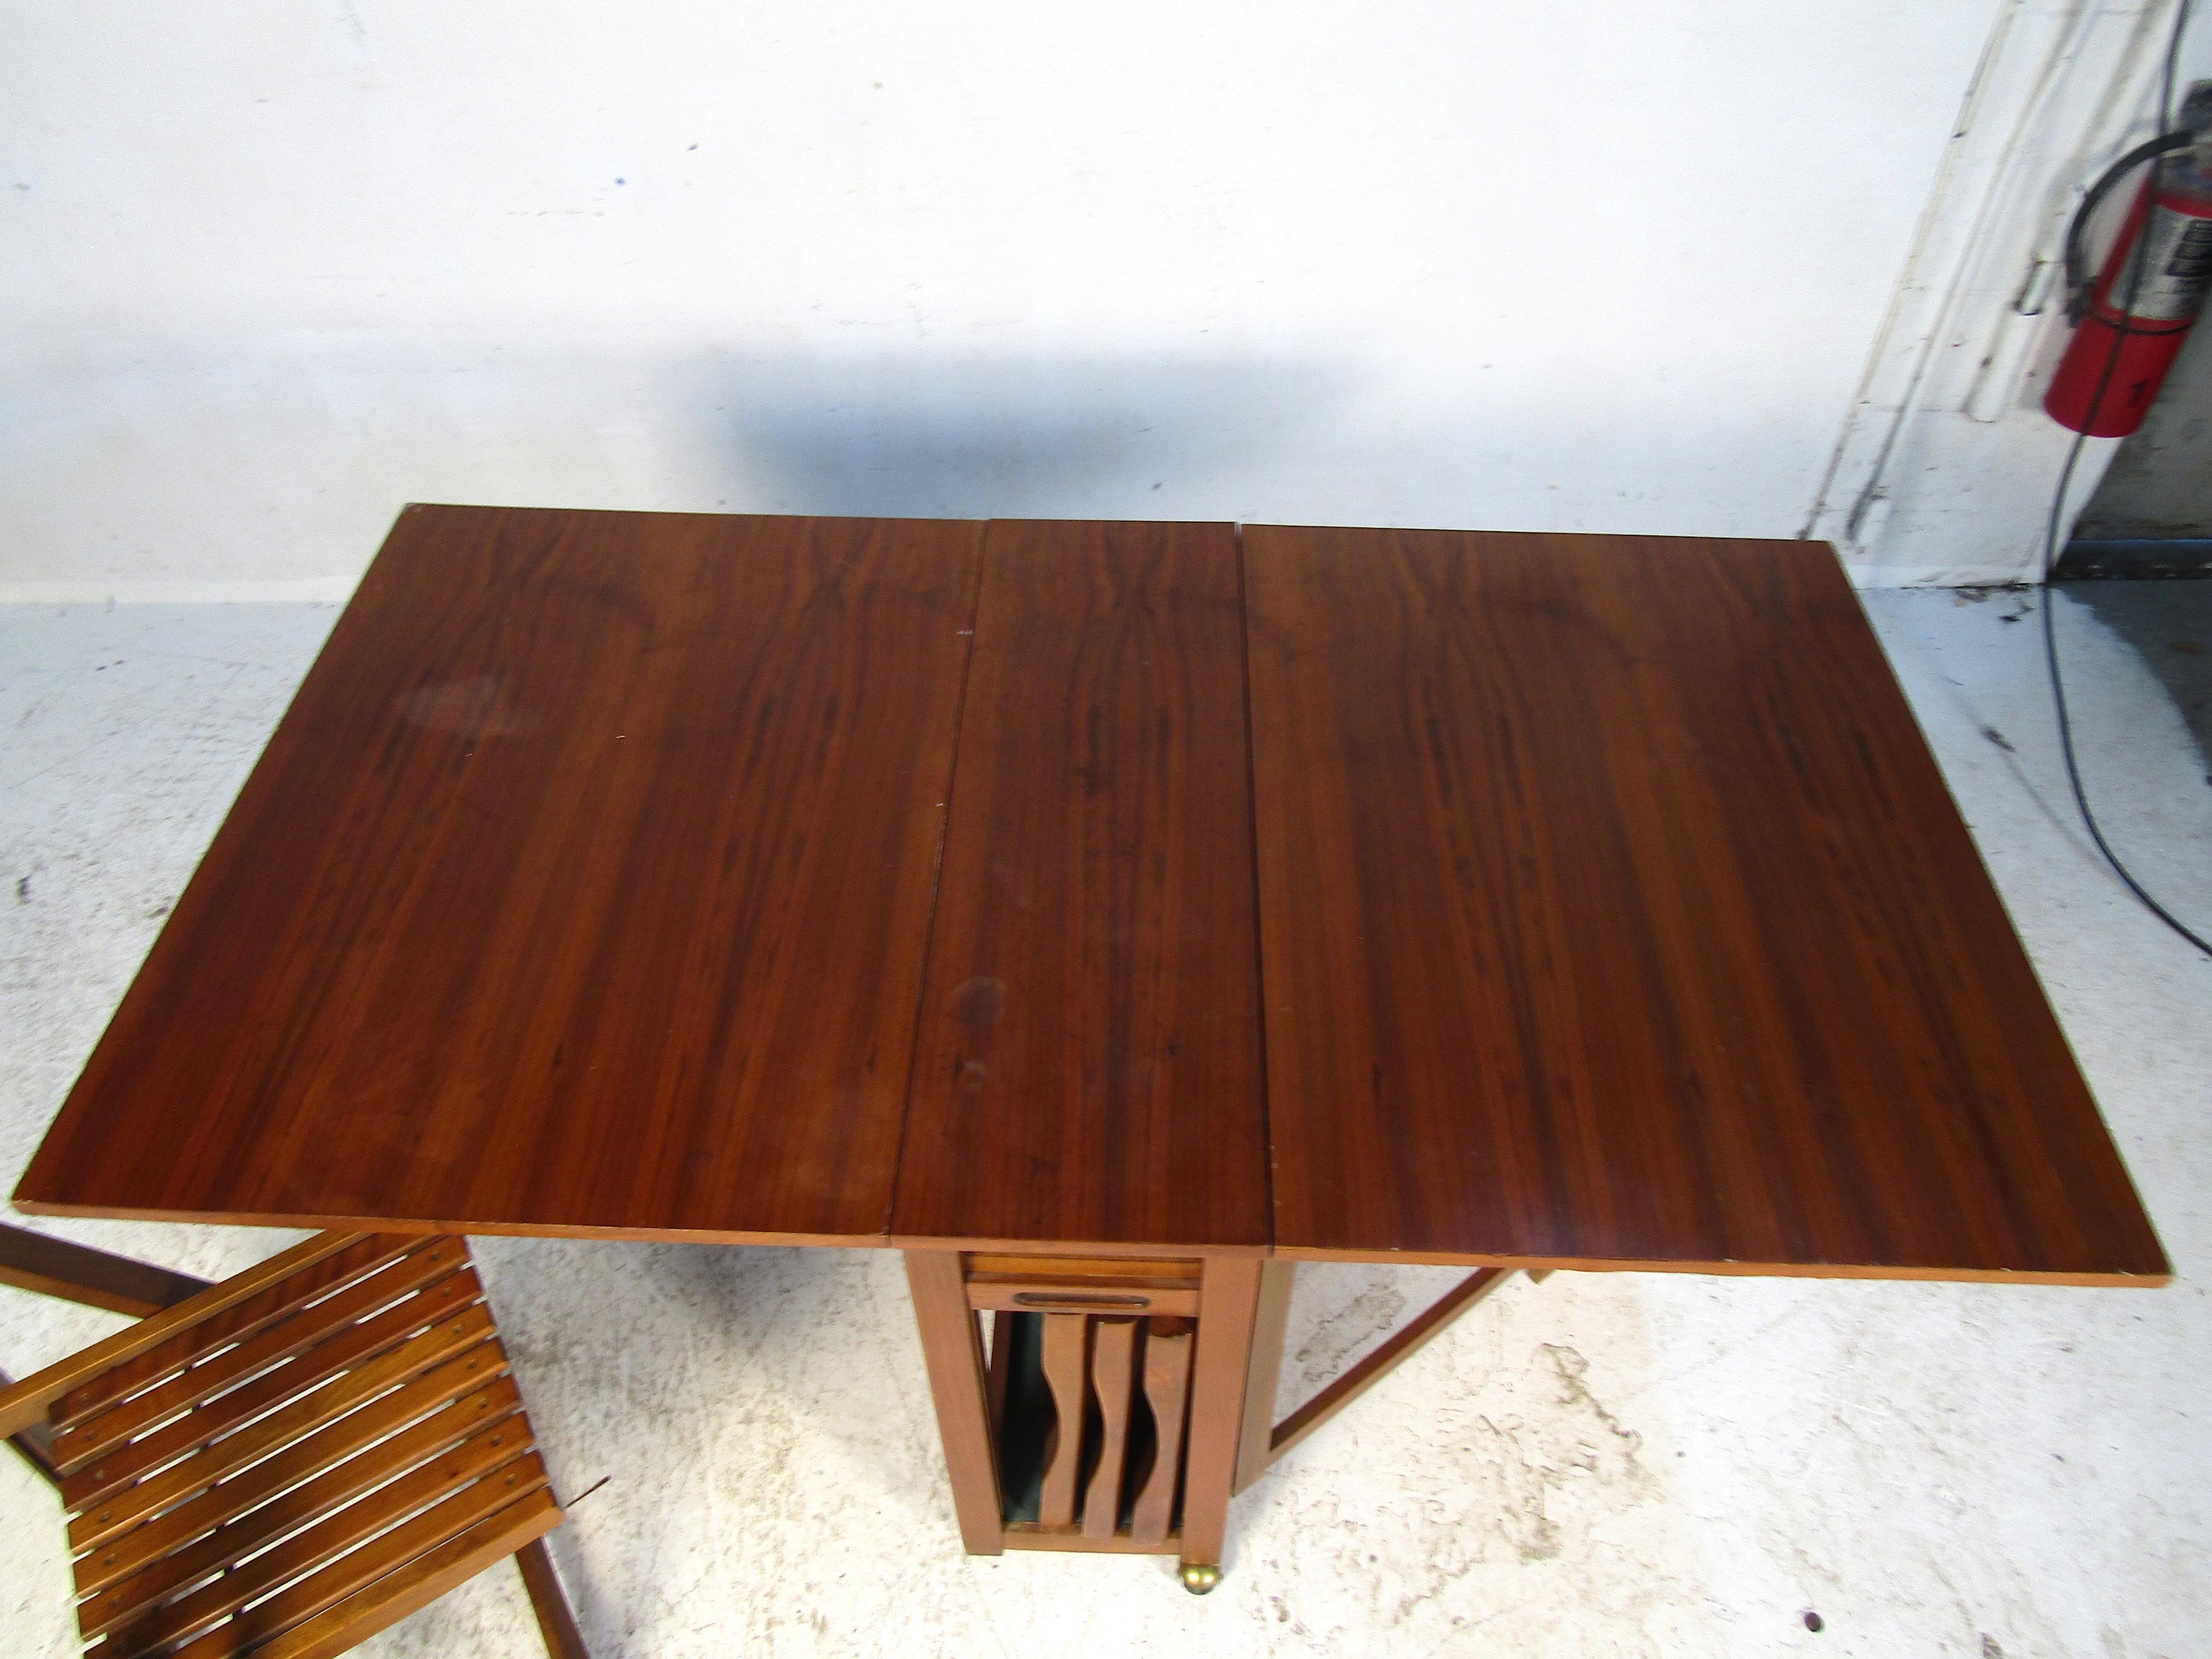 Midcentury Drop-Leaf Table with Storable Matching Chairs 1